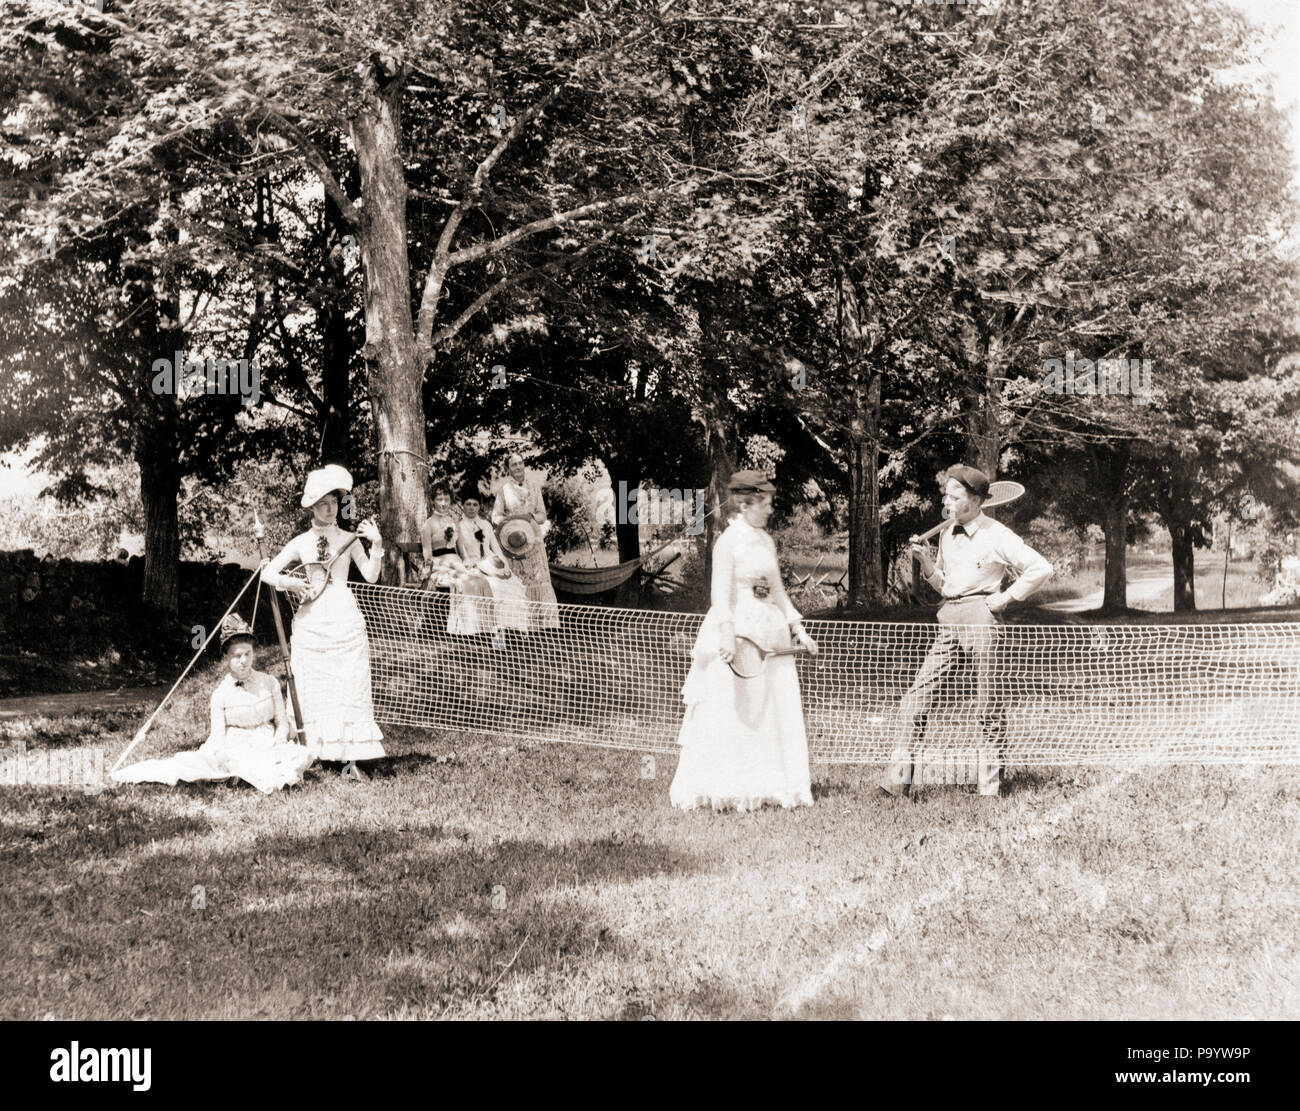 1890s 1900s GROUP OF MEN AND WOMEN GATHERED AROUND GRASS TENNIS COURT HOLDING RACQUETS - o2391 SPL001 HARS MANY HEALTHY YOUNG ADULT RACKET NET TEAMWORK COMPETITION ATHLETE JOY LIFESTYLE FEMALES RURAL GROWNUP HEALTHINESS ATHLETICS HORIZONTAL FULL-LENGTH LADIES PERSONS MALES ATHLETIC SUNNY PLAYERS B&W SUCCESS ACTIVITY PHYSICAL STRENGTHENING WEIGHT LOSS RACQUET AEROBIC HOBBY LEISURE SELF ESTEEM TURN OF THE 20TH CENTURY HOBBIES RECREATION NETS MENTAL HEALTH RACKETS 19TH CENTURY ATHLETES FLEXIBILITY MEMBERS MUSCLES STYLISH ACTIONS CARDIOVASCULAR ENHANCE DAYLIGHT GRASS COURT MEMBER RACQUETS Stock Photo